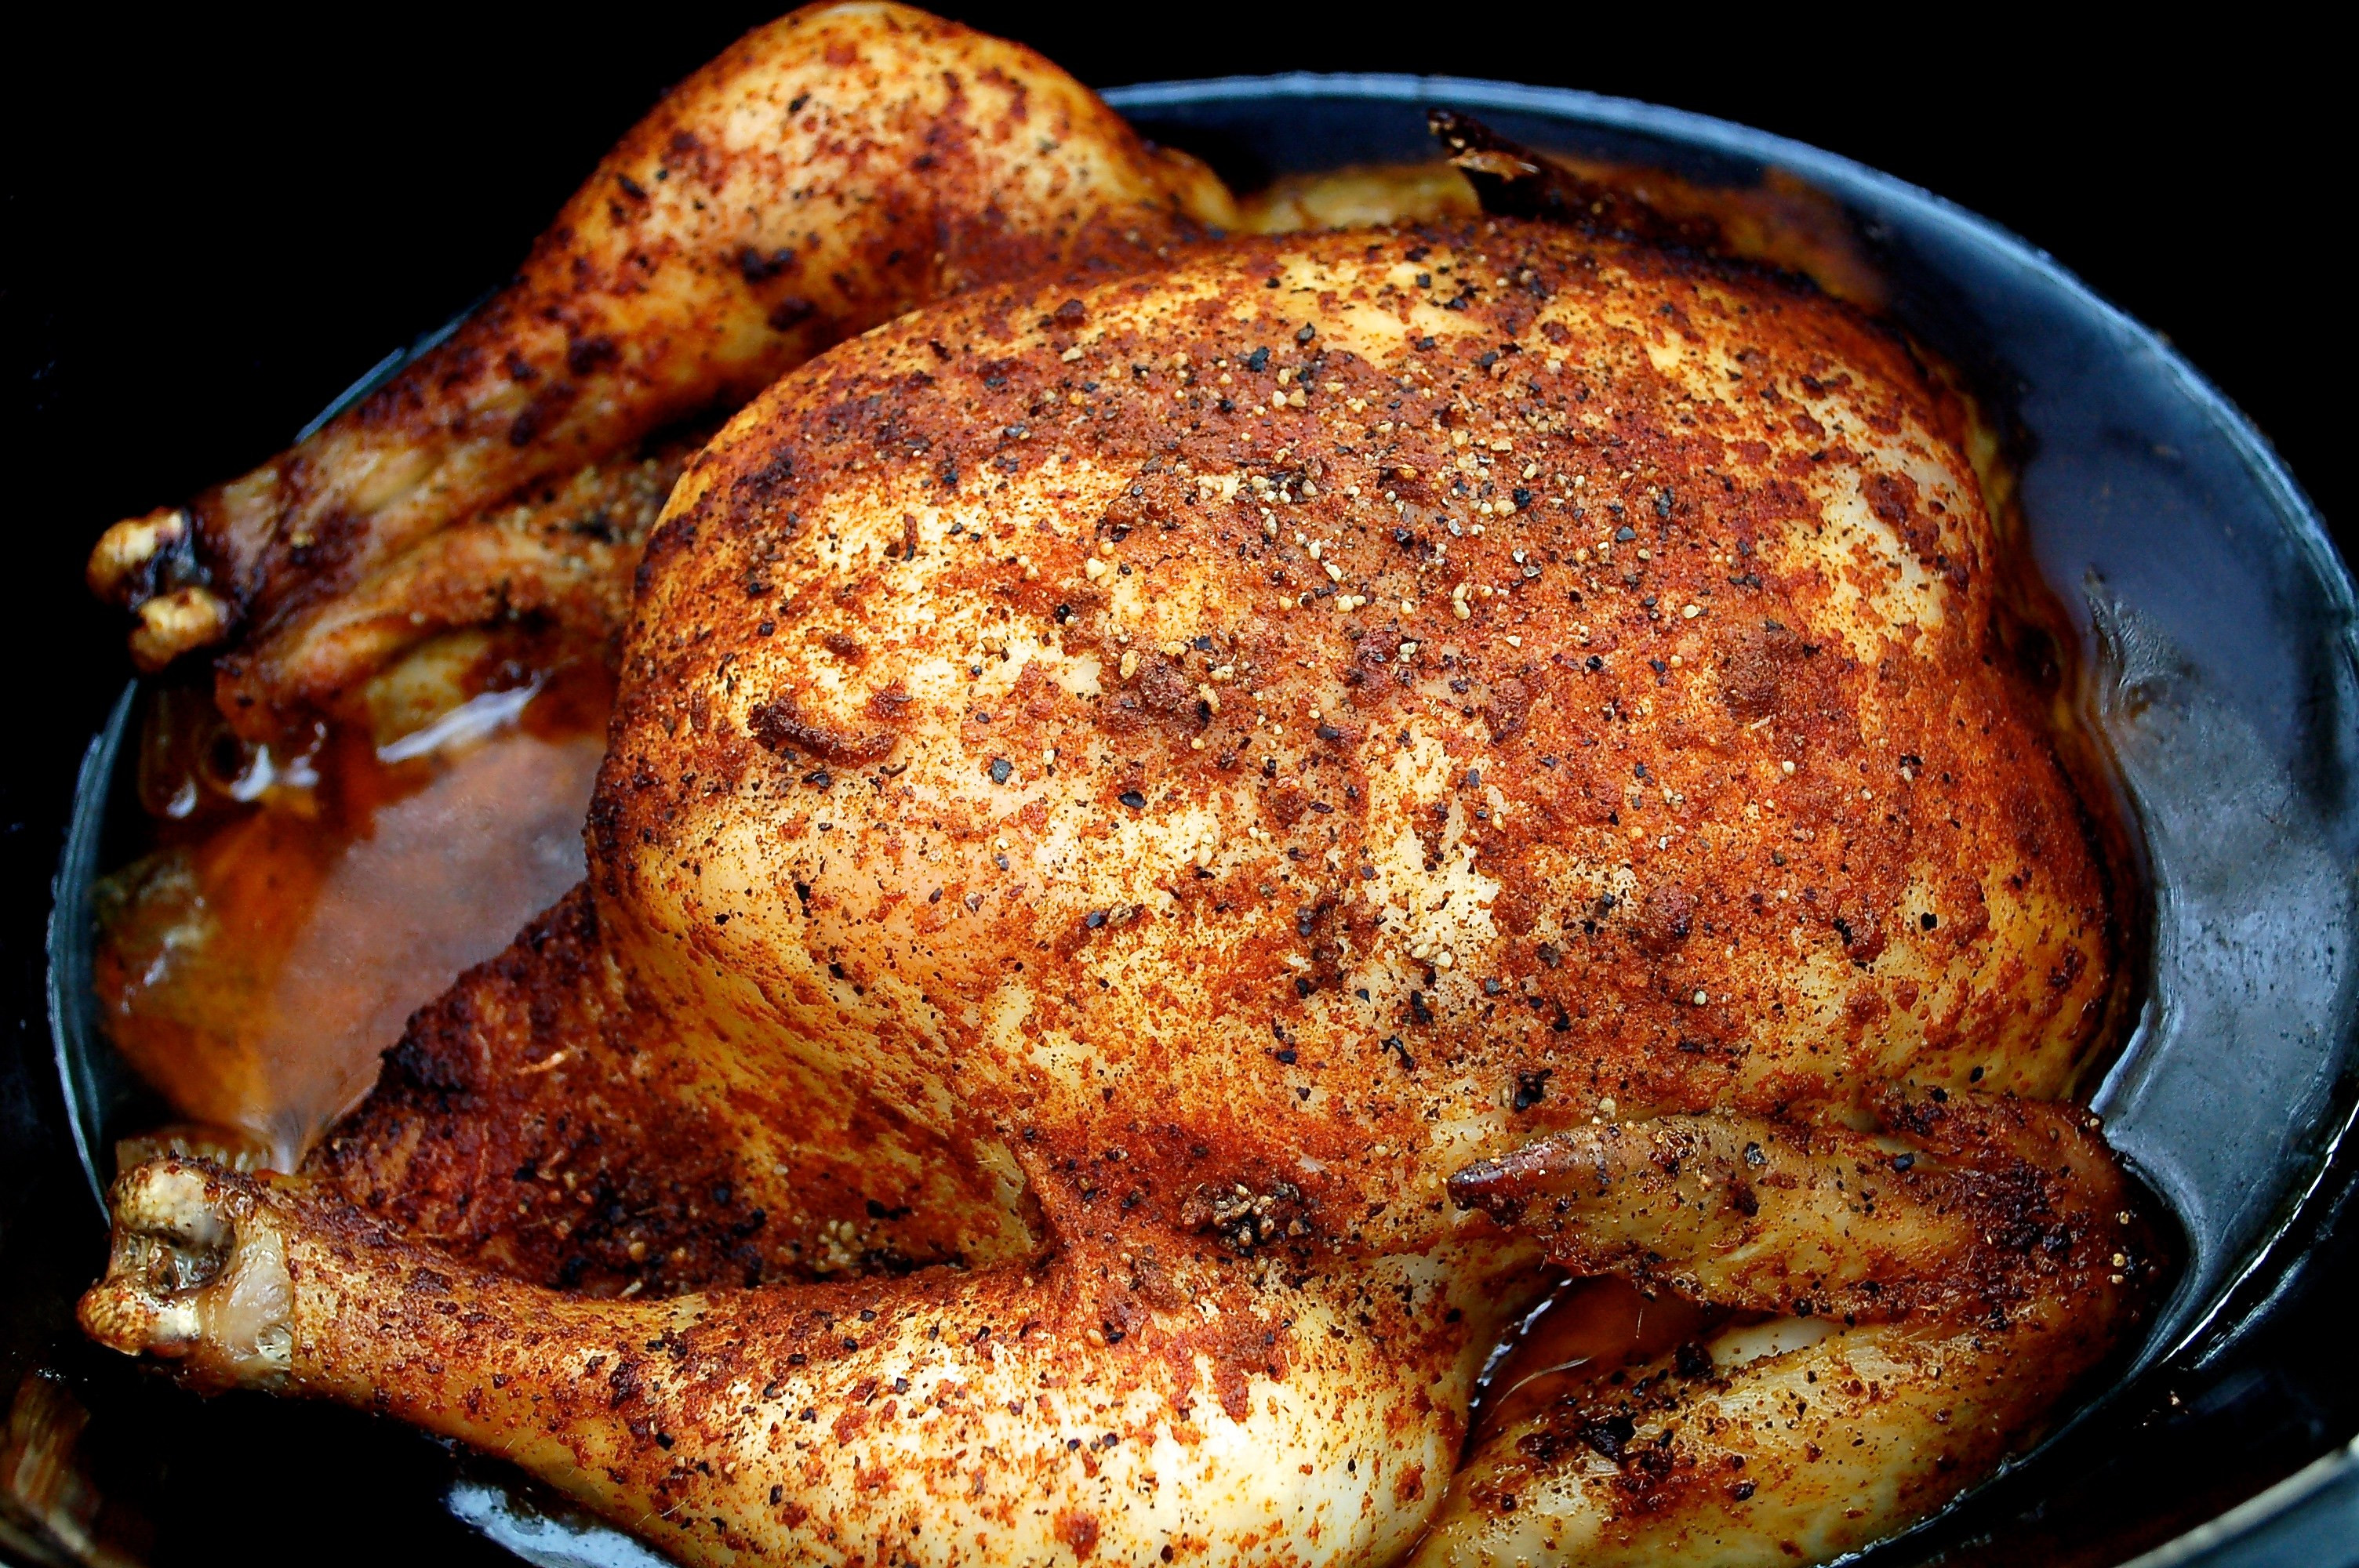 Whole Chicken Recipes Slow Cooker
 Easy Slow Cooker Whole Chicken The Slow Cooking Housewife